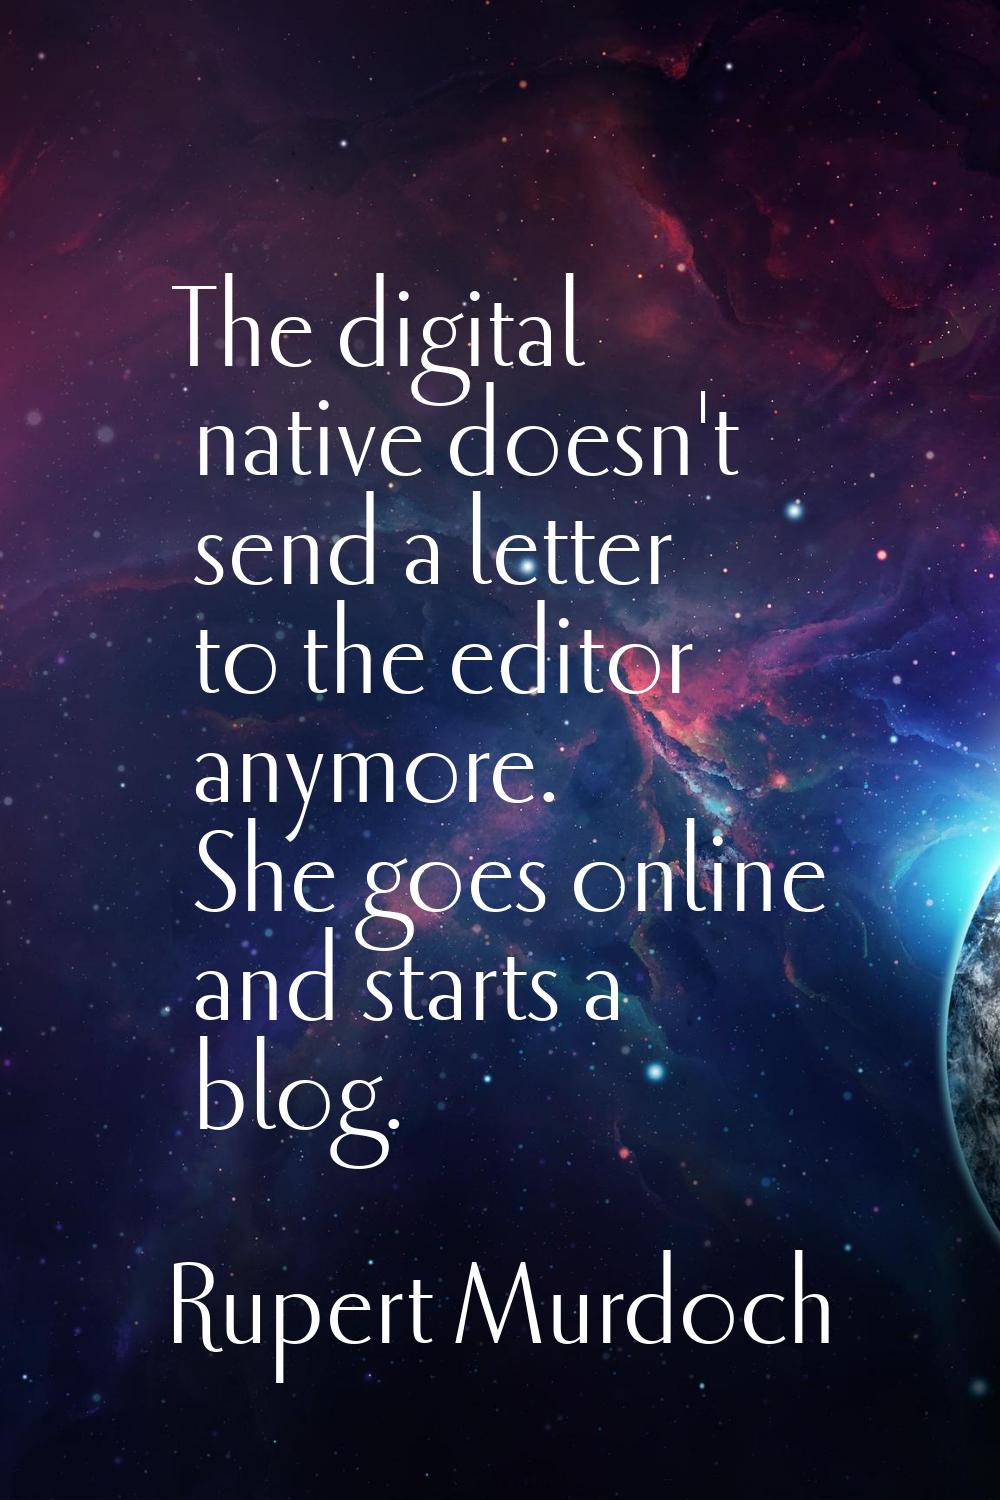 The digital native doesn't send a letter to the editor anymore. She goes online and starts a blog.